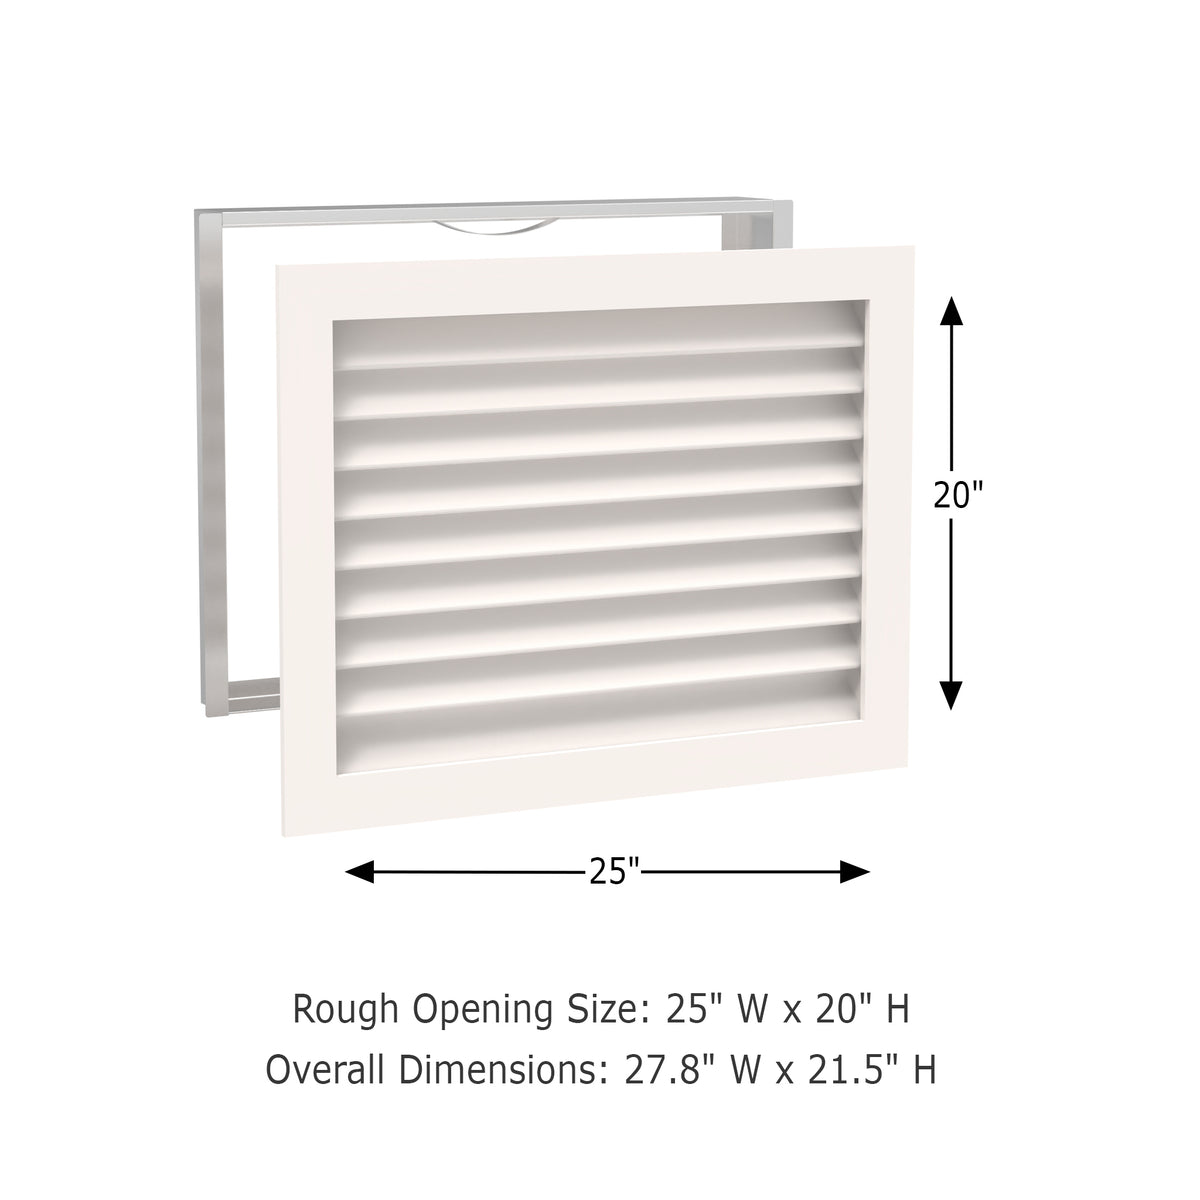 Worth Home Products - decorative wood AC vent covers luxury return vent - Primed Wood Louvers 25x20